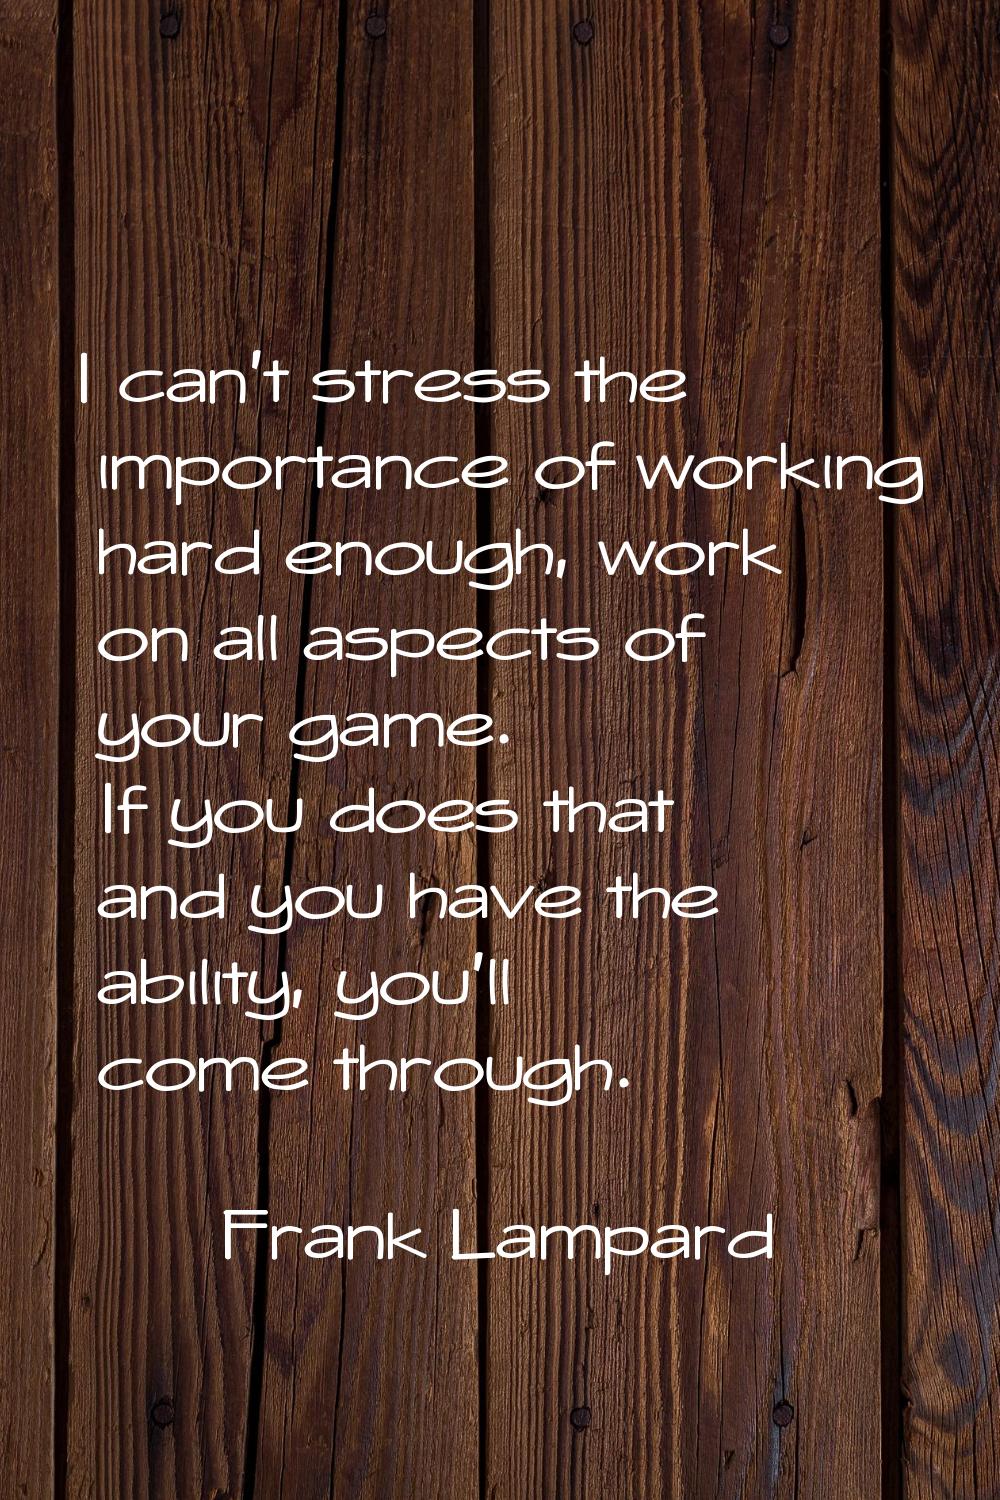 I can't stress the importance of working hard enough, work on all aspects of your game. If you does